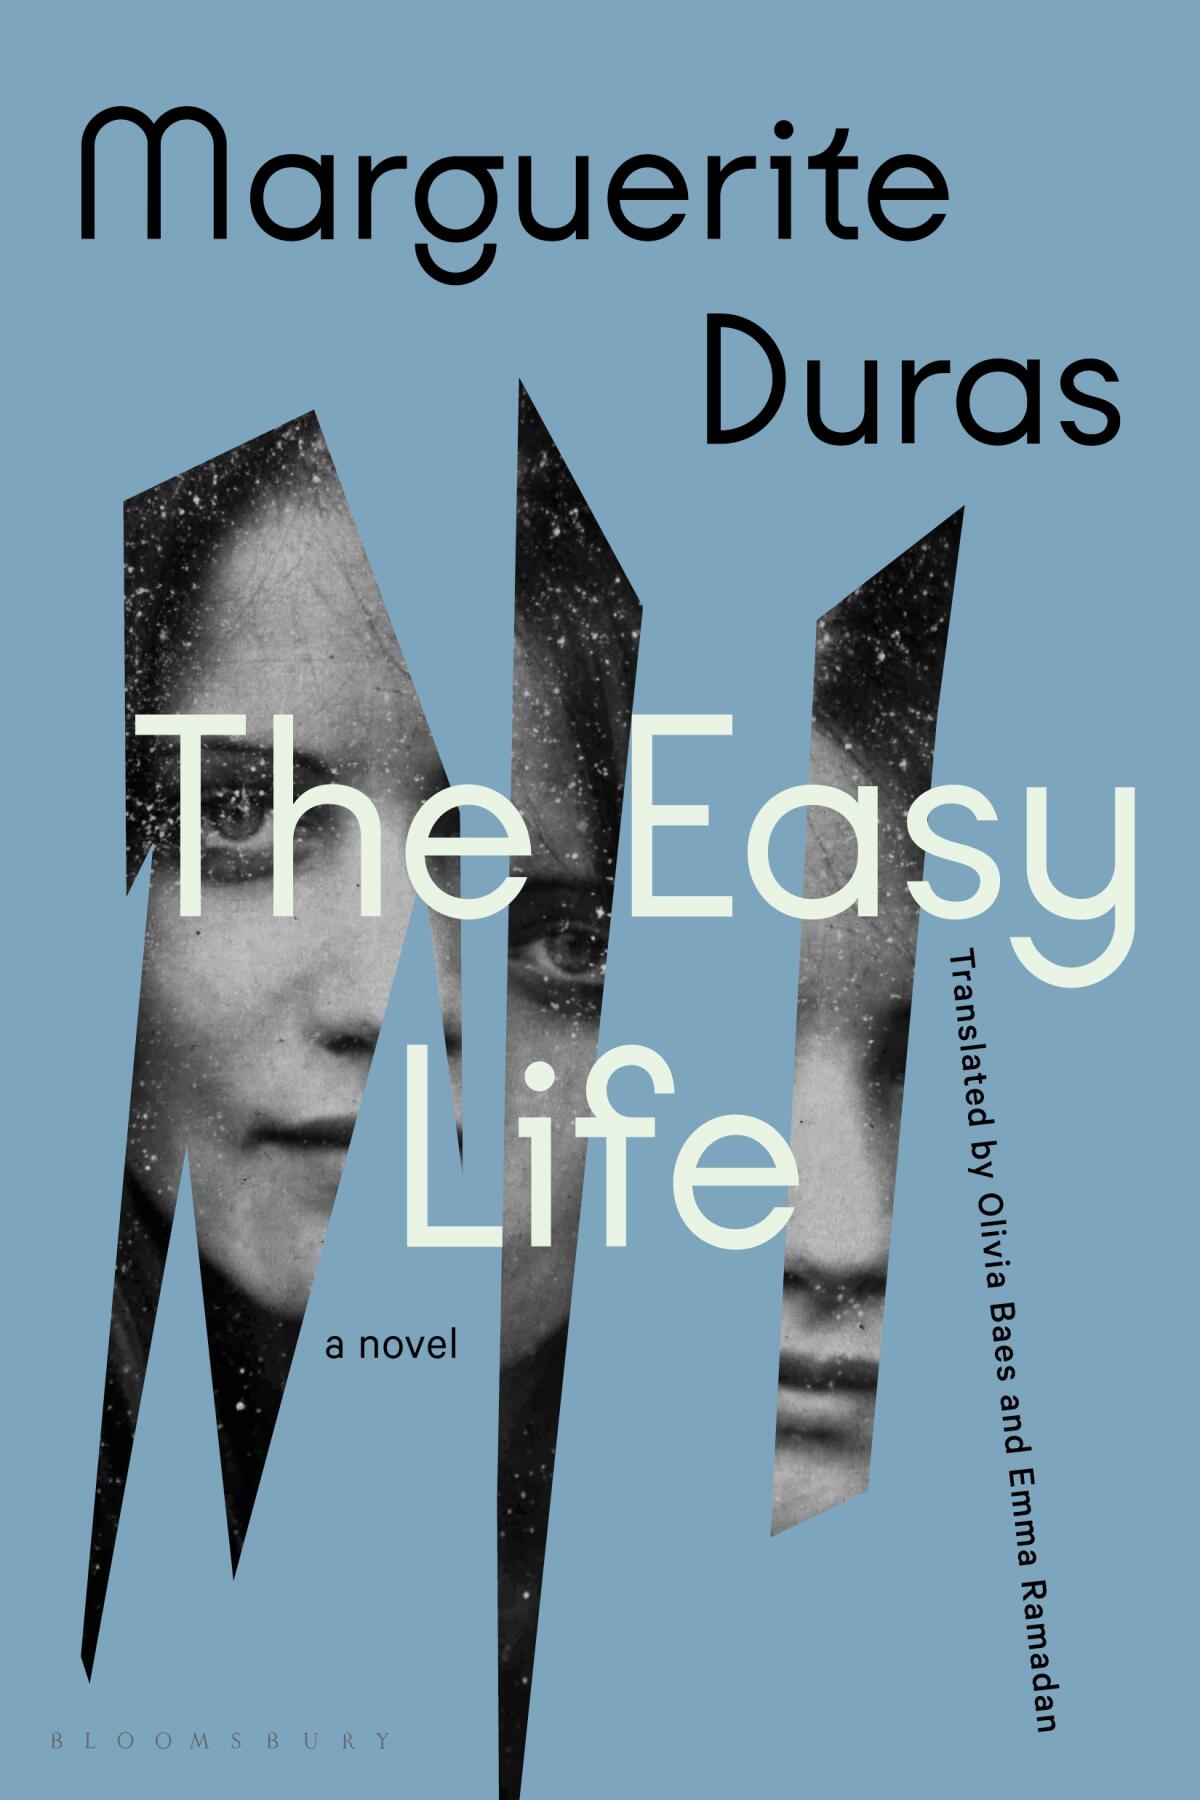 "The Easy Life" by Marguerite Duras, translated by Olivia Baes and Emma Ramadan